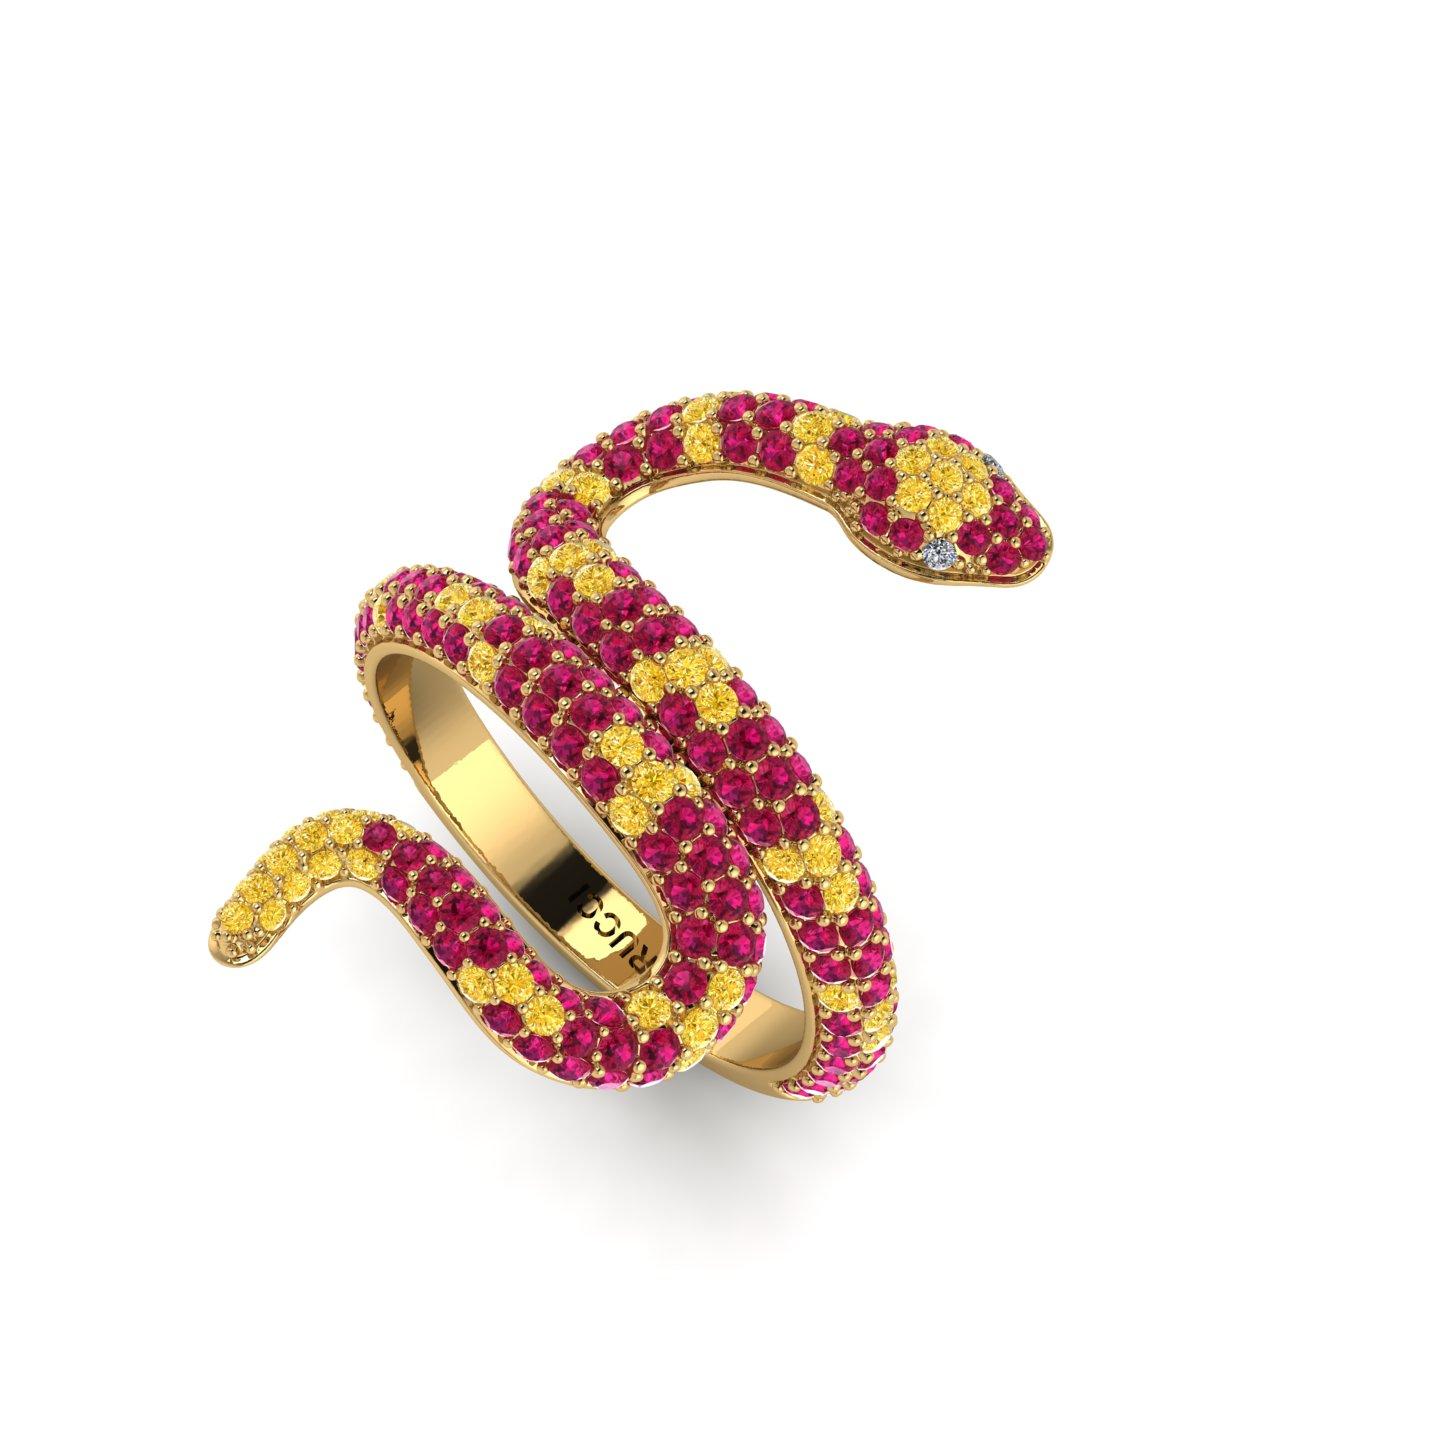 Ruby Pave' Snake 18k Yellow Gold Ring, with Yellow Sapphires, hand picked, totalling approximately 1.35 carats, made in 18k Yellow gold  with green emeralds as eyes.  You can create your own custom combination of color gemstones.
Made to order in